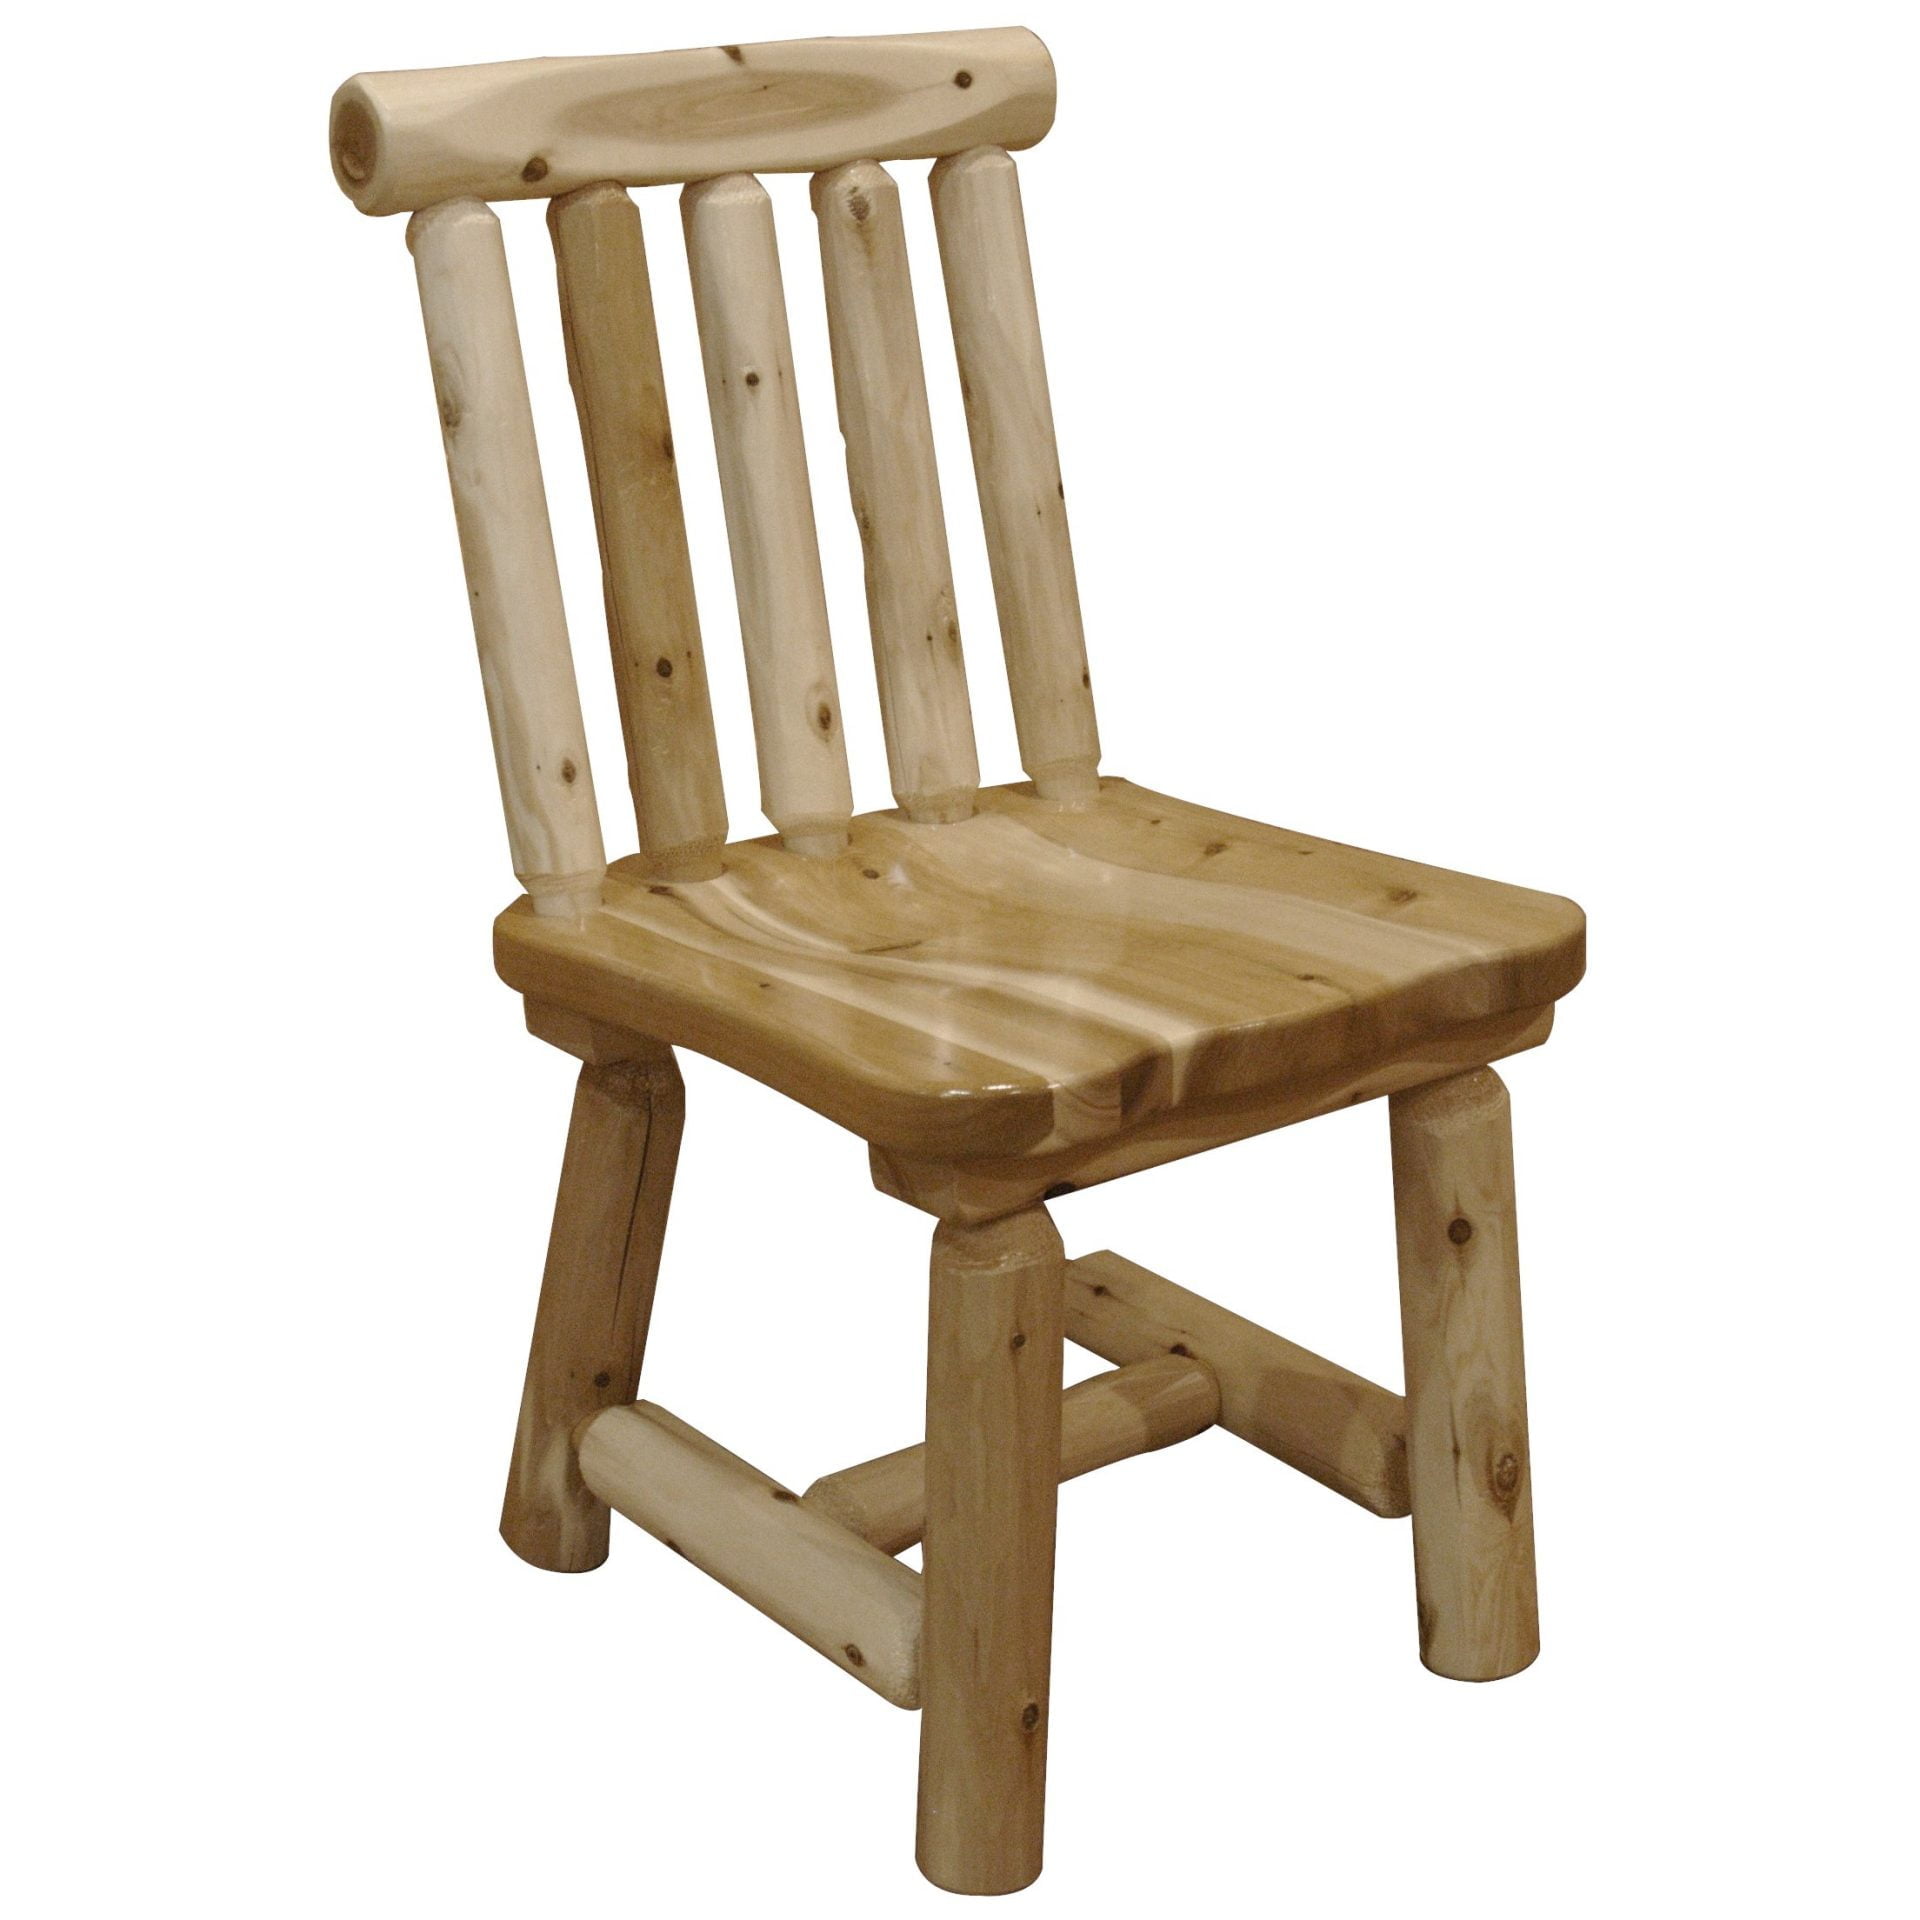 Rustic White Cedar Log Spindle Back Dining Chair